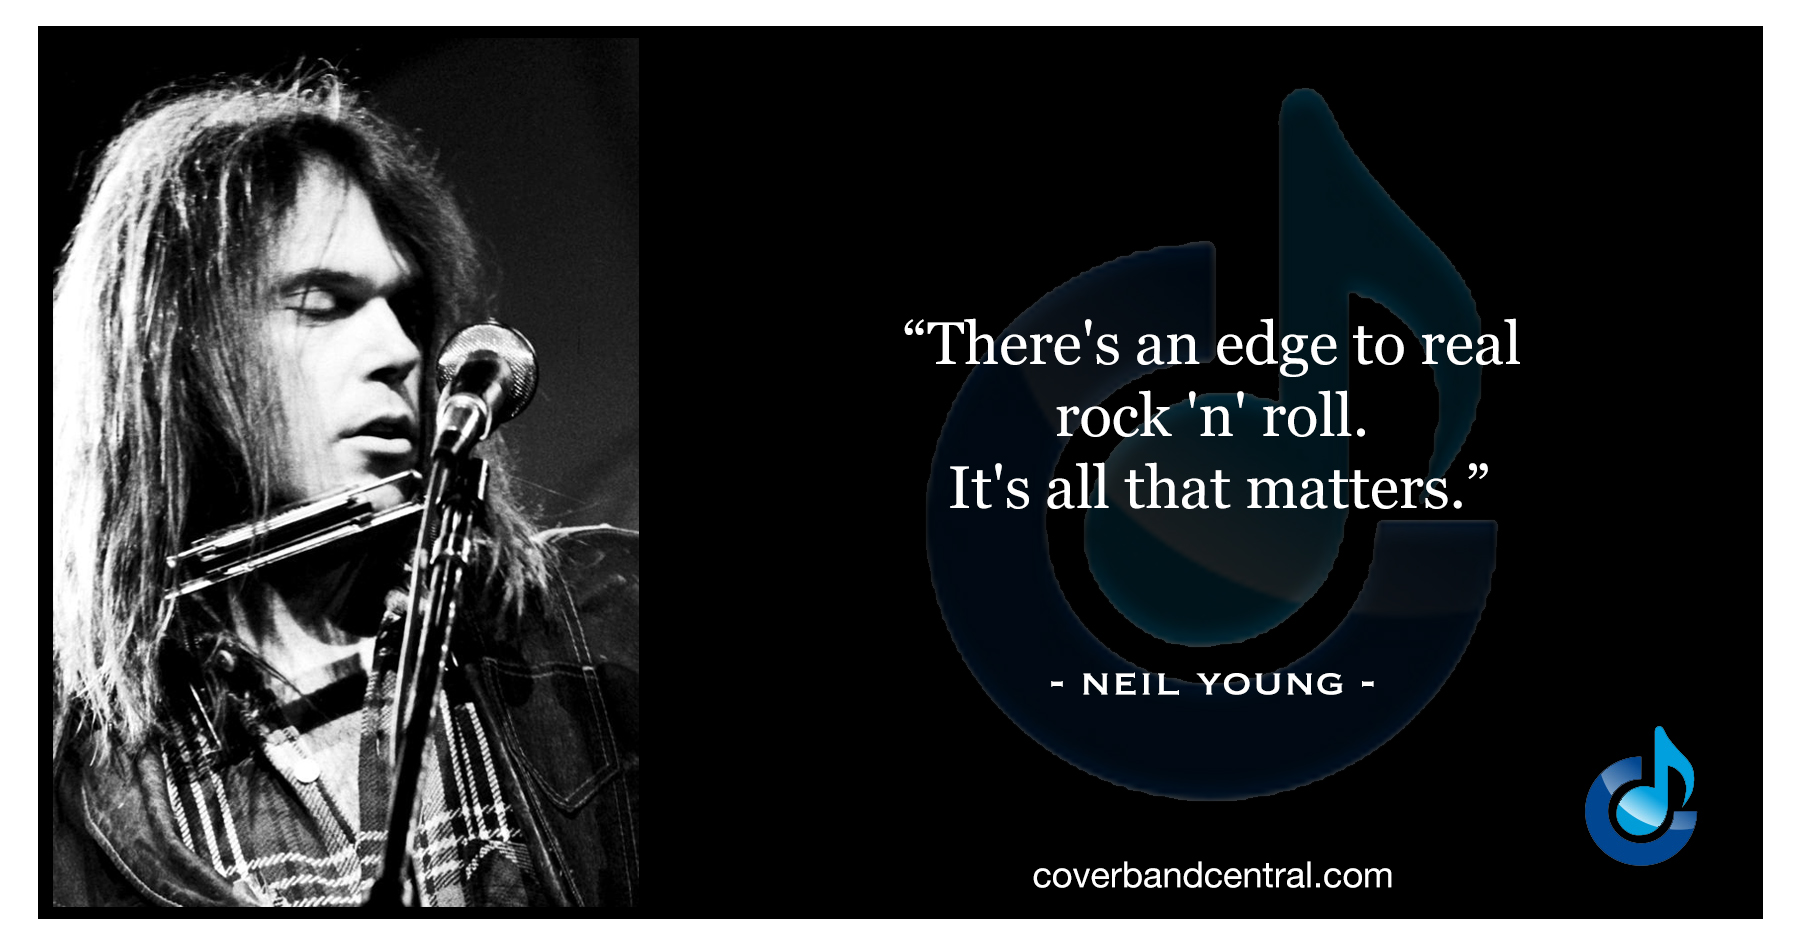 Neil Young quote